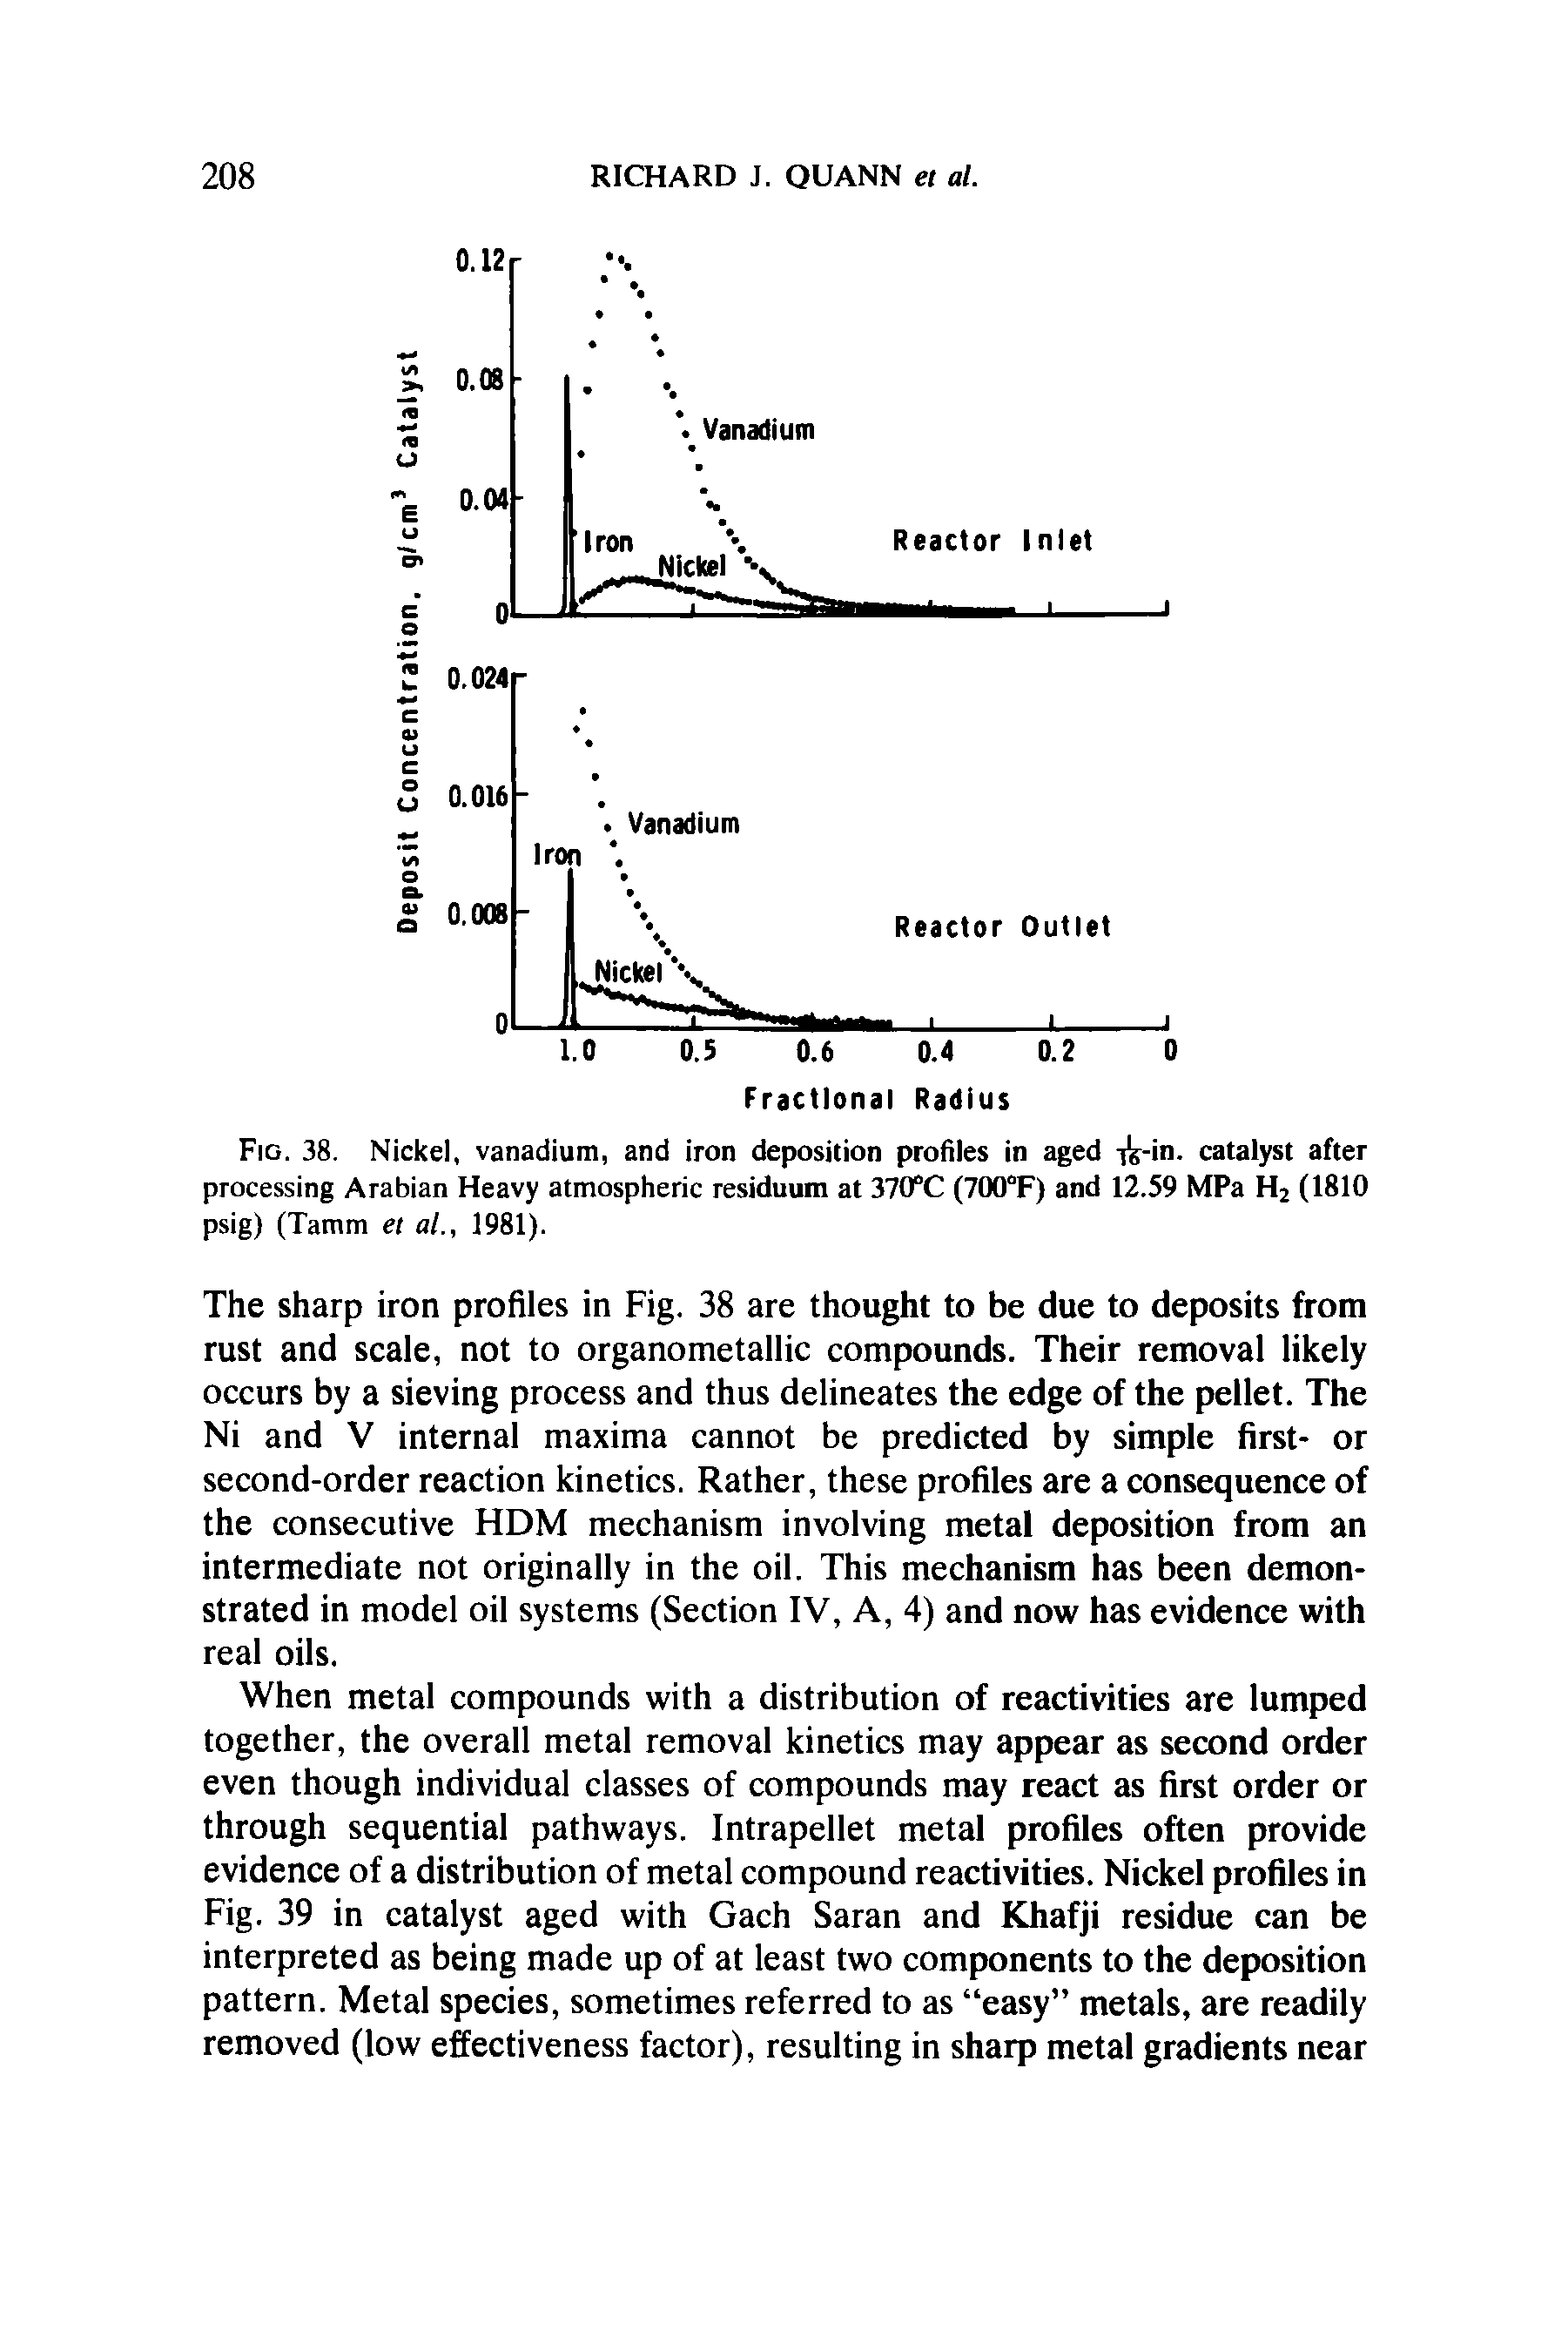 Fig. 38. Nickel, vanadium, and iron deposition profiles in aged i -in. catalyst after processing Arabian Heavy atmospheric residuum at 370 C (700°F) and 12.59 MPa H2 (1810 psig) (Tamm et al., 1981).